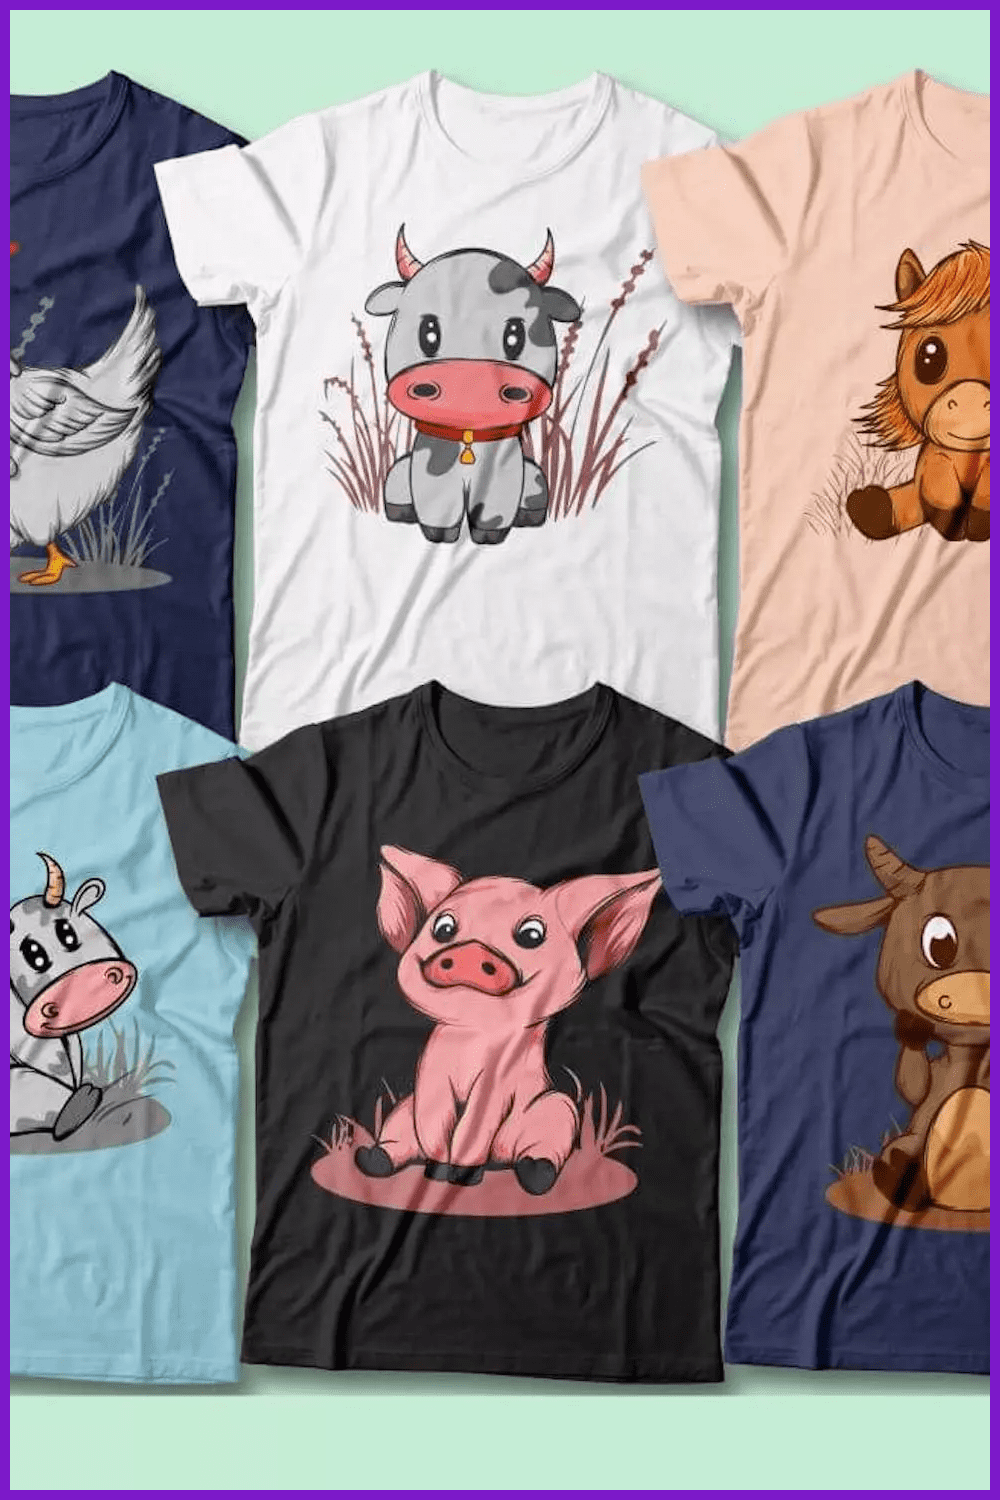 T-shirts in different colors with cute cows, pigs, chickens, bulls.